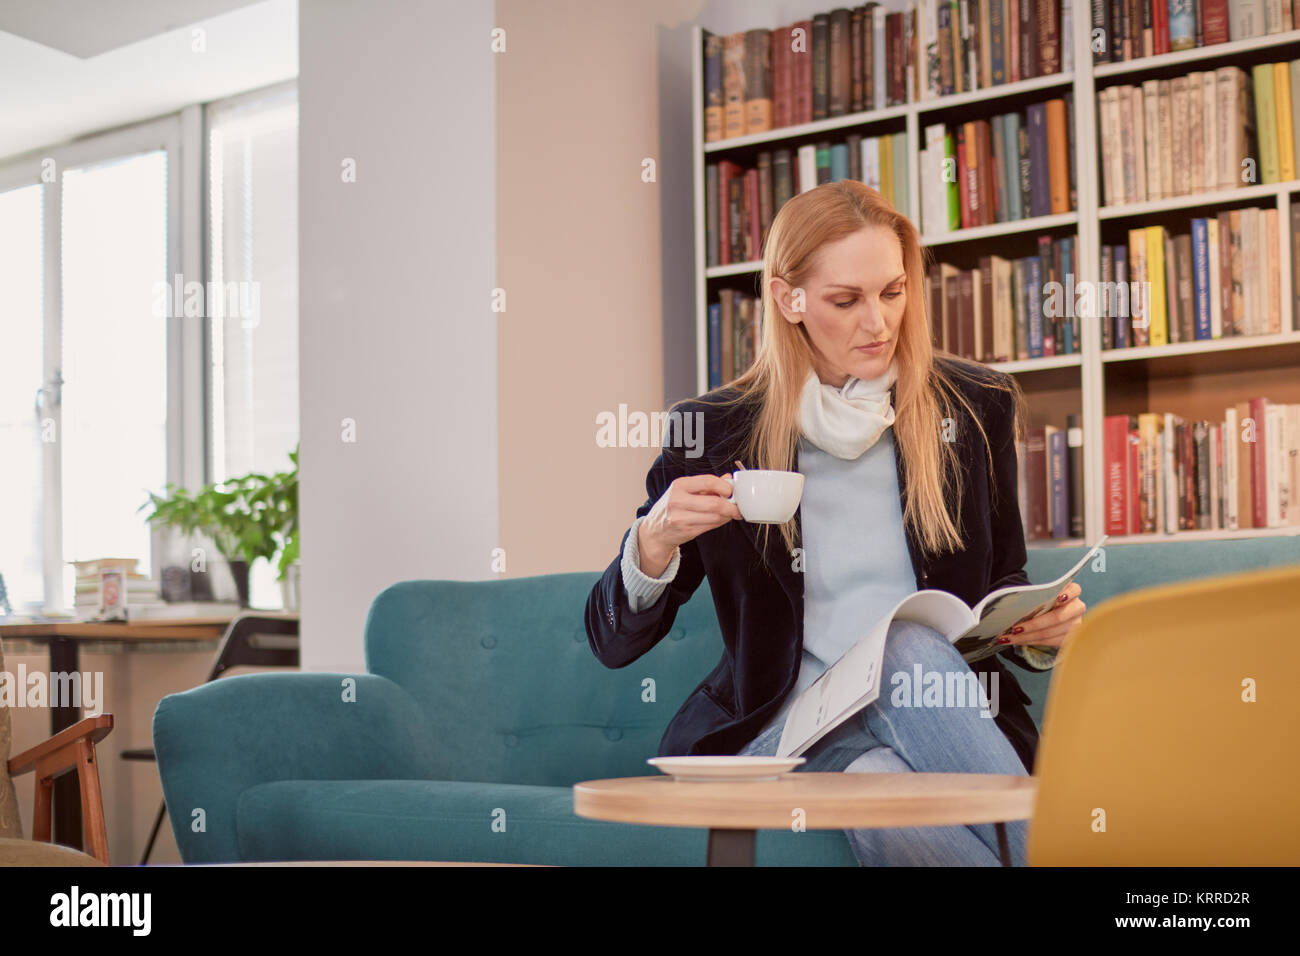 one woman, one person 40 years old, holding coffee cup, reading magazine, in library, book store, book shop, sitting in sofa. Shelf full of books behi Stock Photo